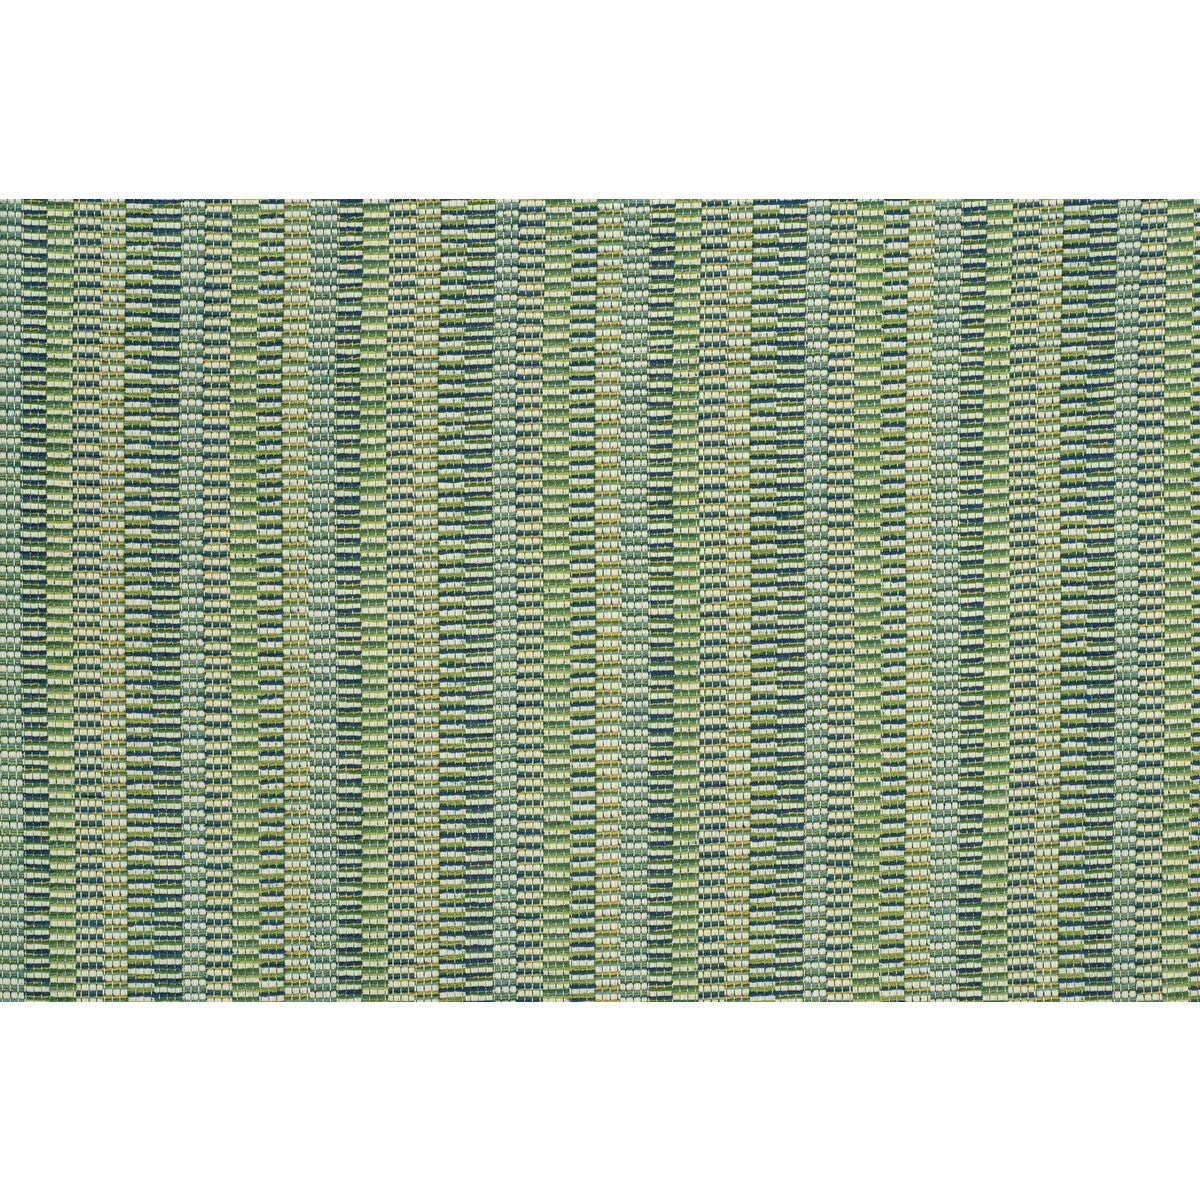 Kravet Contract fabric in 34732-35 color - pattern 34732.35.0 - by Kravet Contract in the Crypton Incase collection